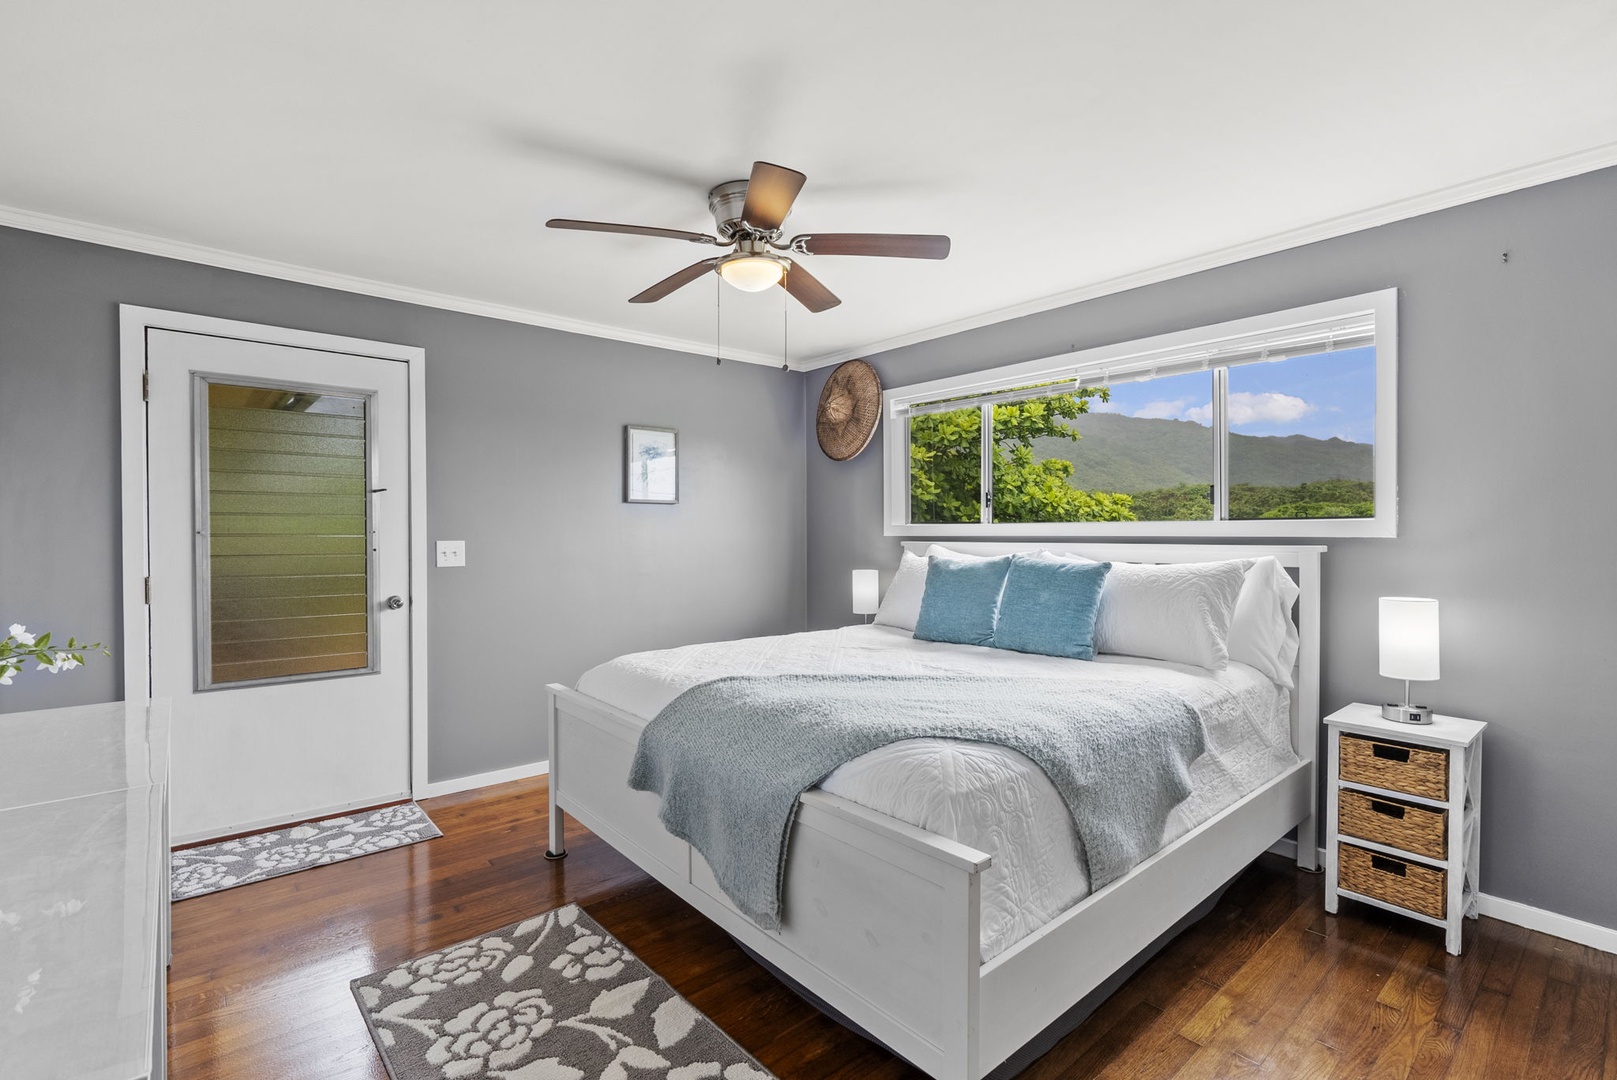 Hauula Vacation Rentals, Mau Loa Hale - Guest bedroom with access to deck